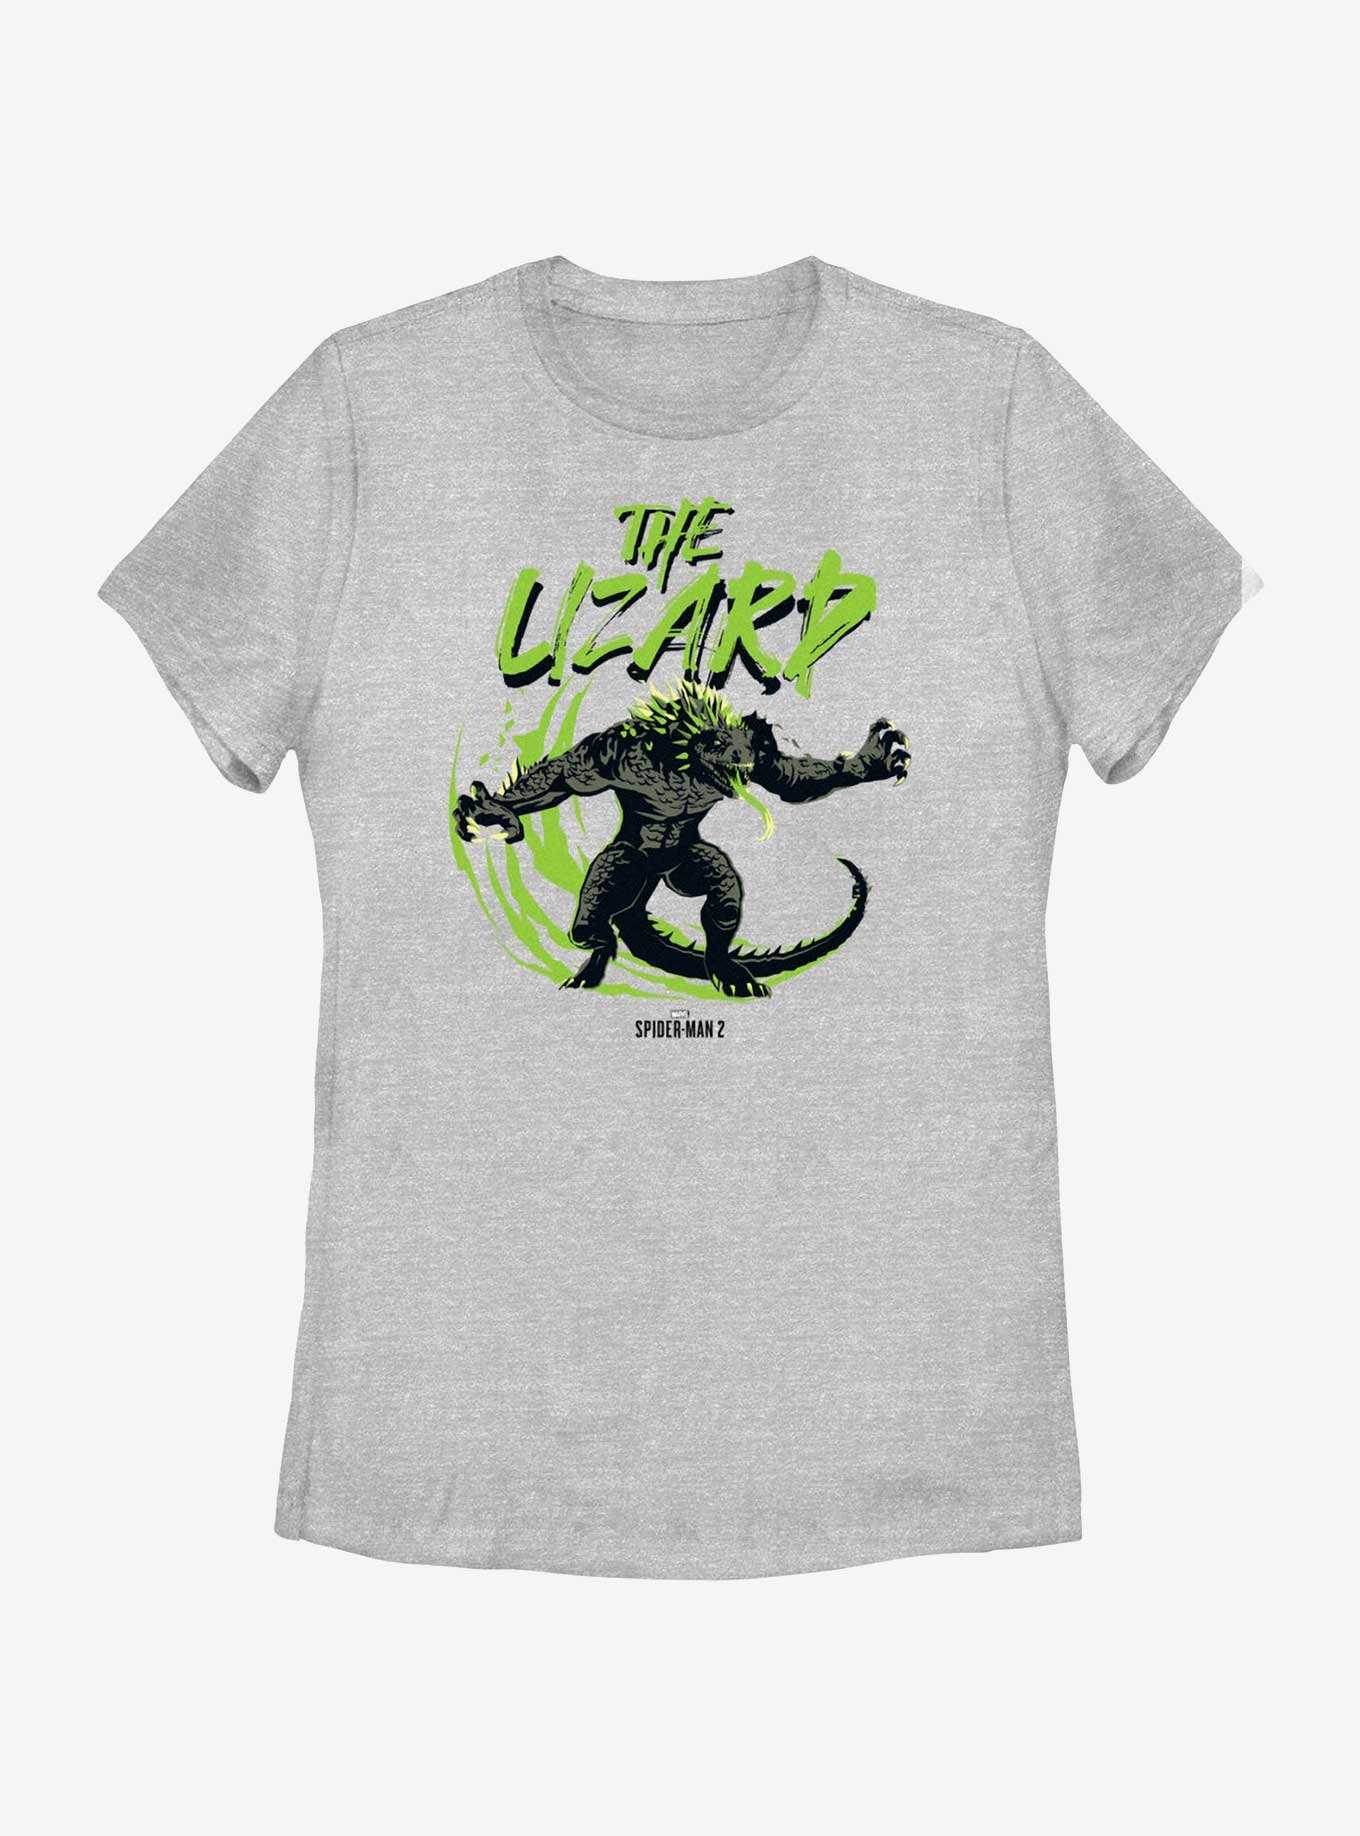 Marvel Spider-Man 2 Game The Lizard Womens T-Shirt, , hi-res